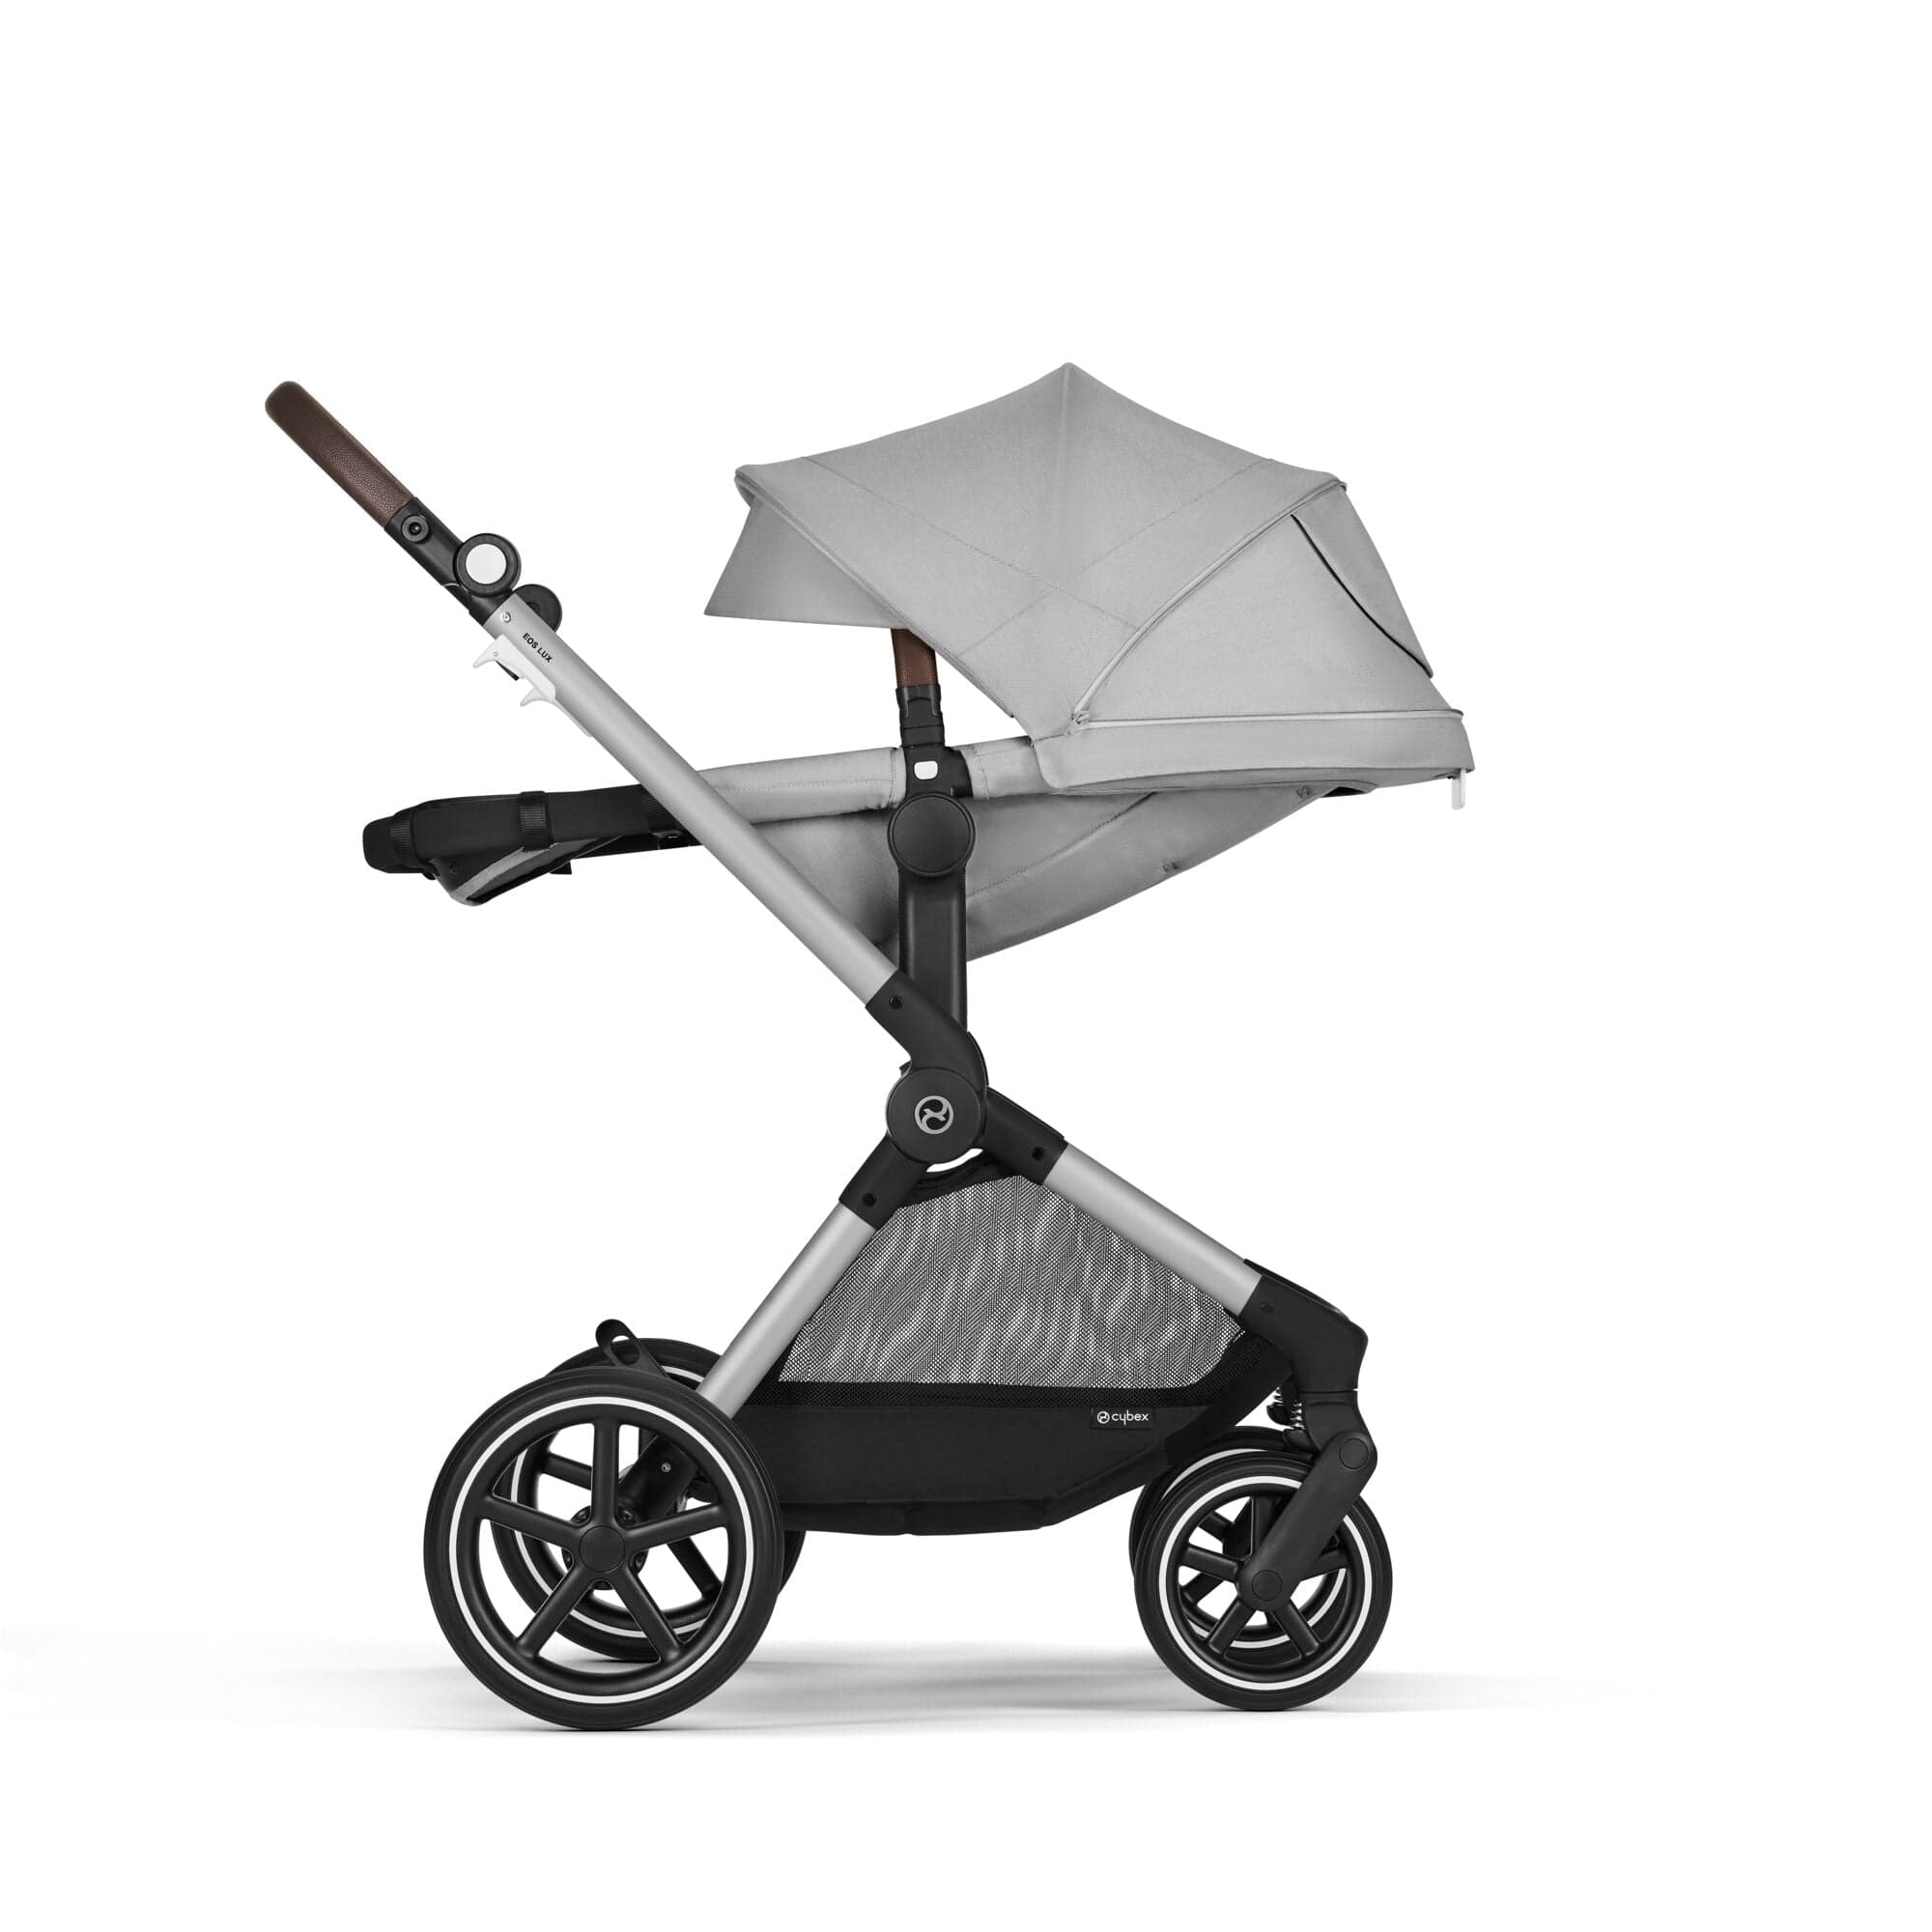 Cybex Eos Lux Stroller in Lava Grey Travel Systems 522003849 4063846368563